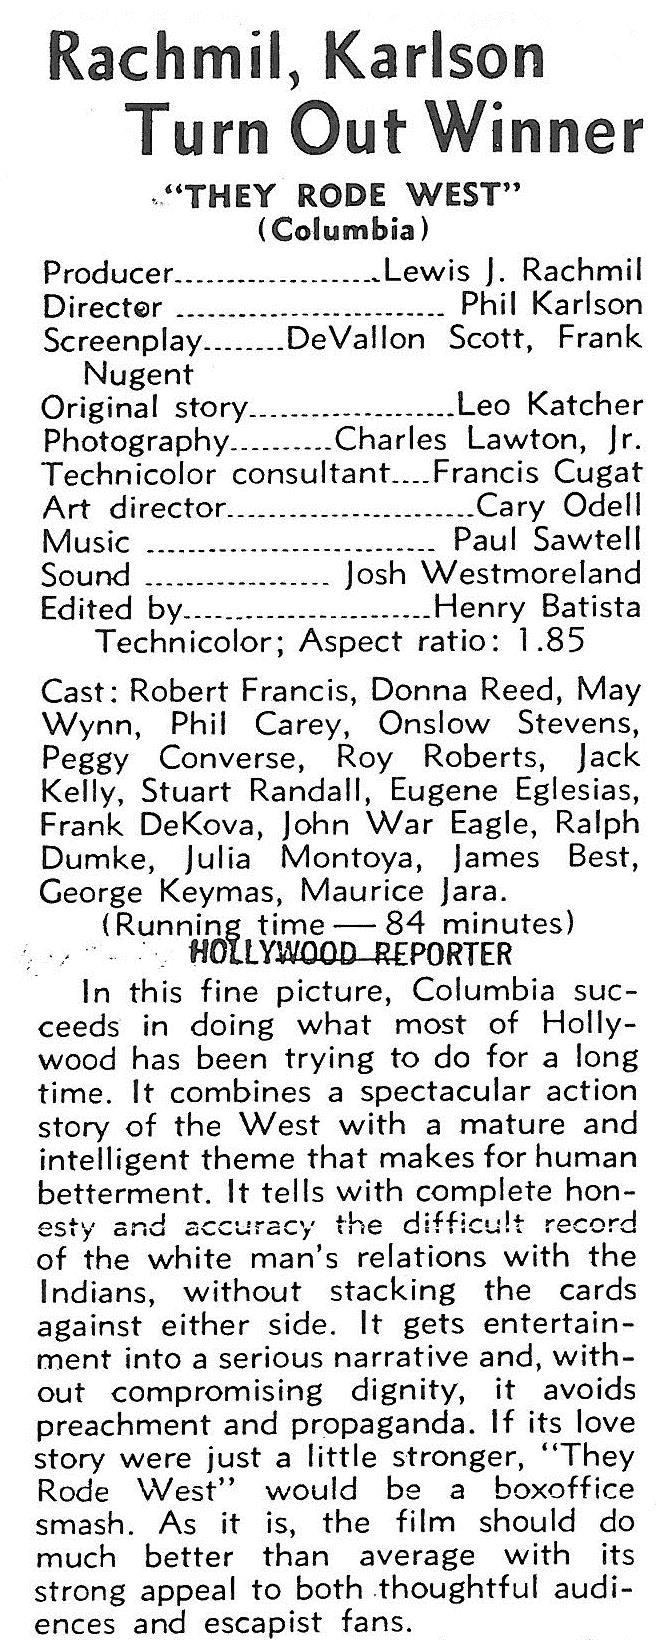  Review of  They Rode West ,  Hollywood Reporter , Oct. 15, 1954. This positive review is thorough and makes a case for  They Rode West  as an unusual sympathetic telling of Native American history with strong credit to all those involved. 